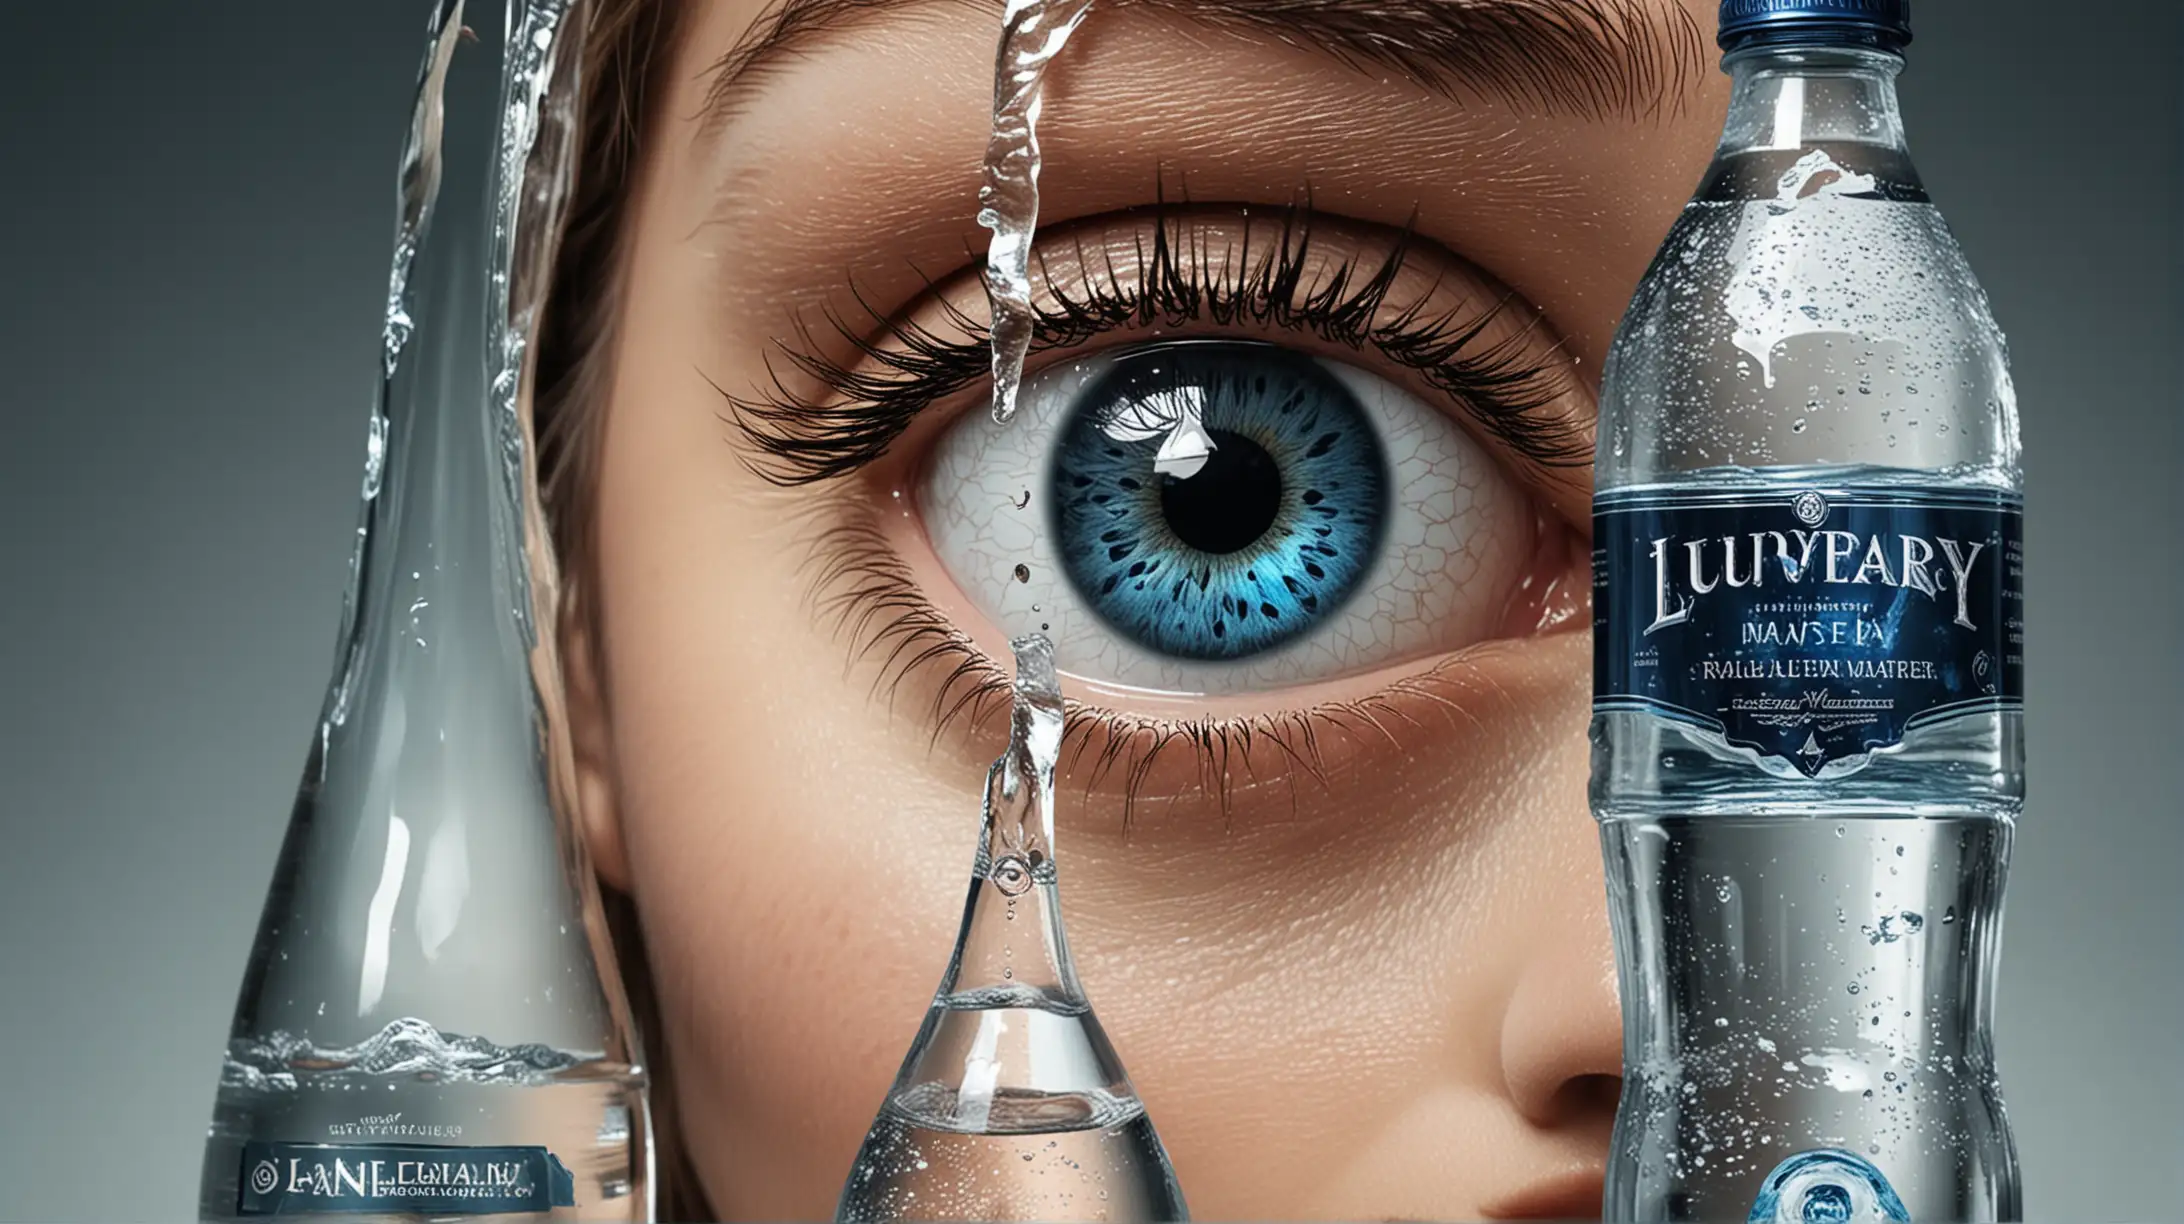 generate a big poster advertisement for a luxury mineral water. The name: luxurytear. there shoulbe an opened bottle of mineral water in the middle of the poster, and a corner of an eye in the upper corner, and a teardrop is dropping into the bottle